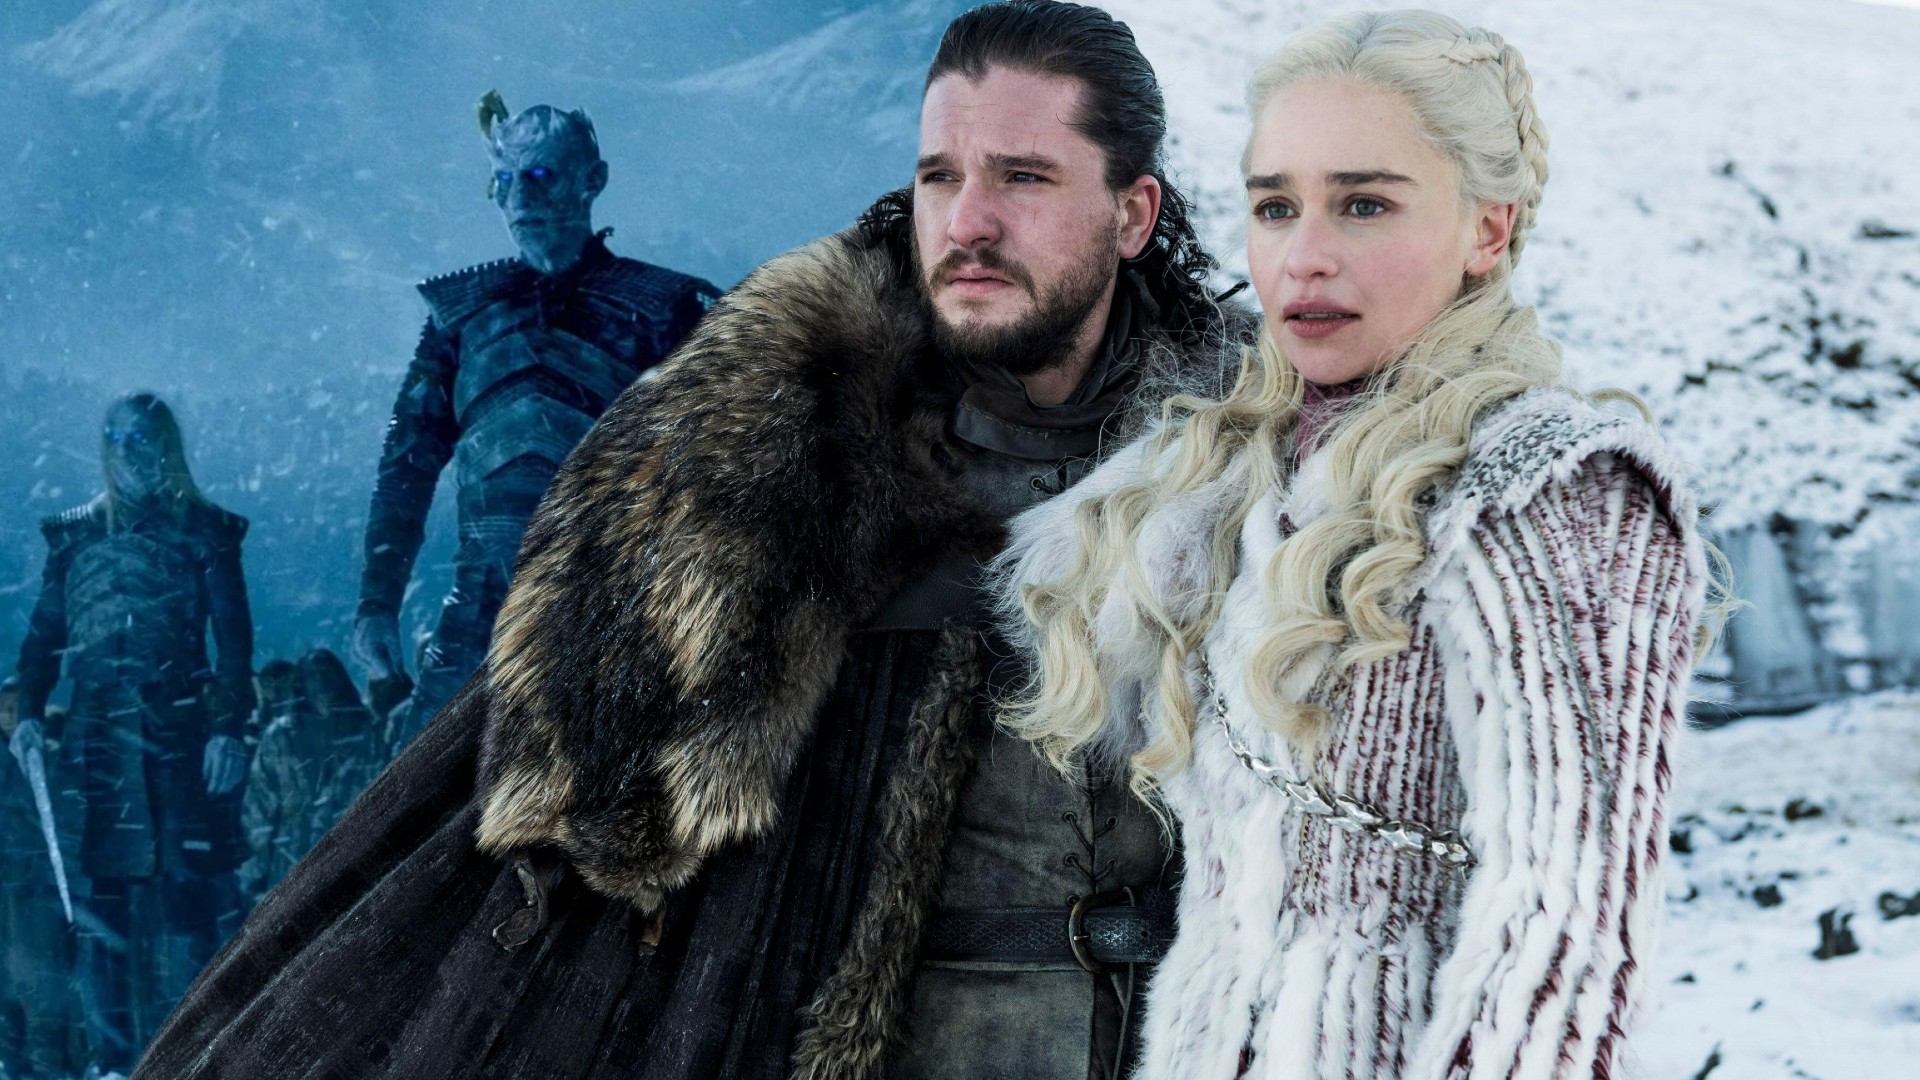 3 Reasons Jon Snow GoT Sequel Will End Up Being a Flop, According to Reddit